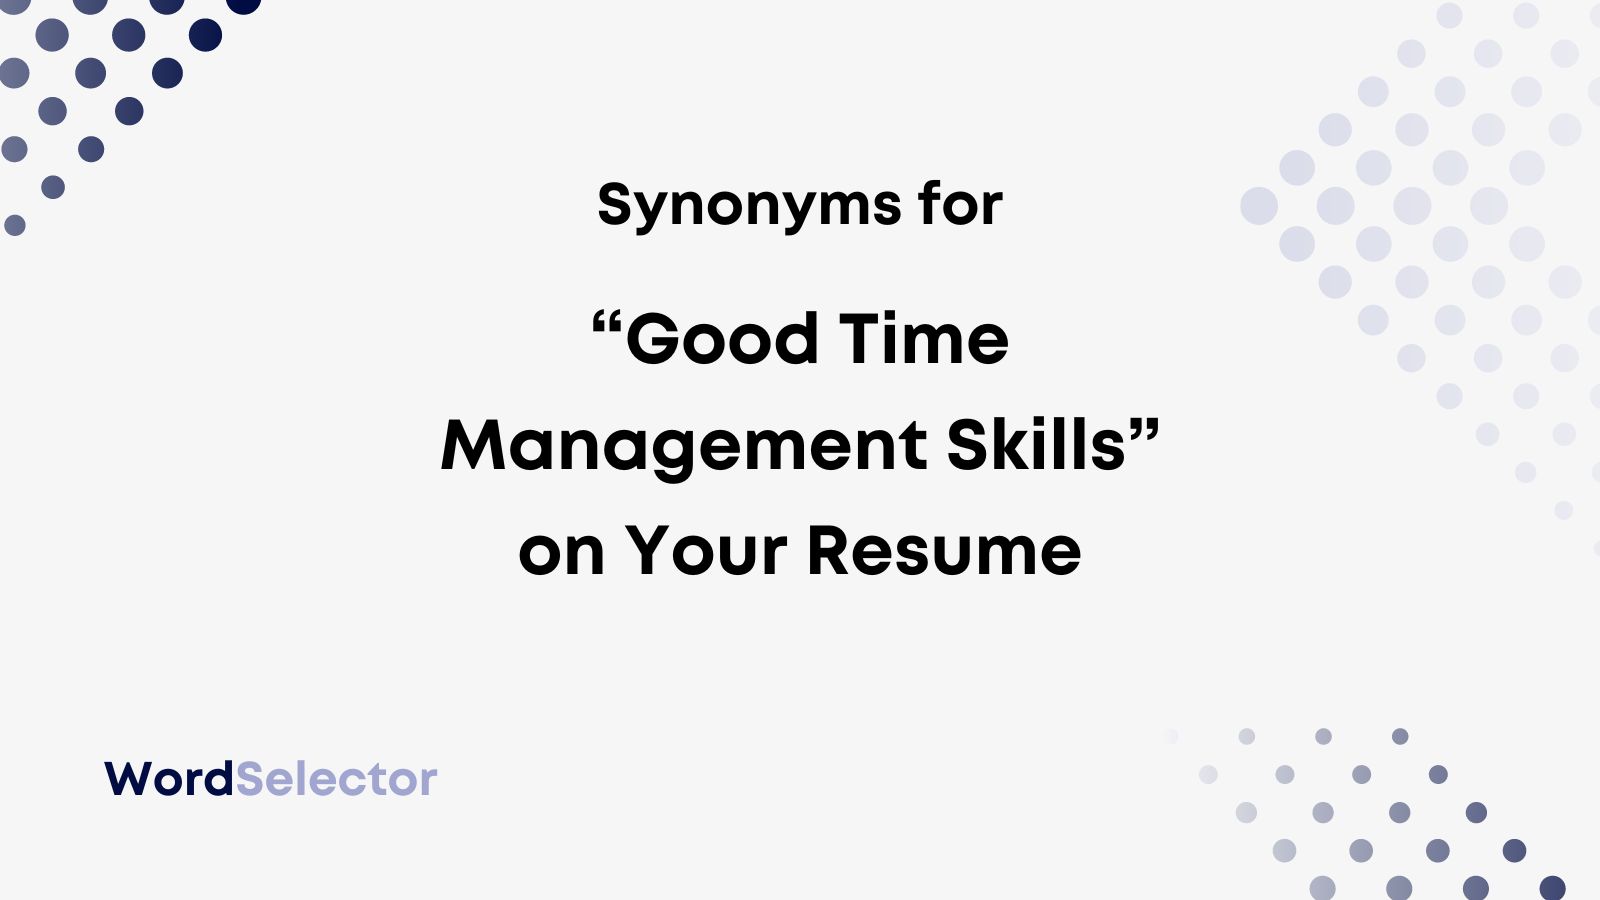 Synonyms for Excellent To Use on Your Resume